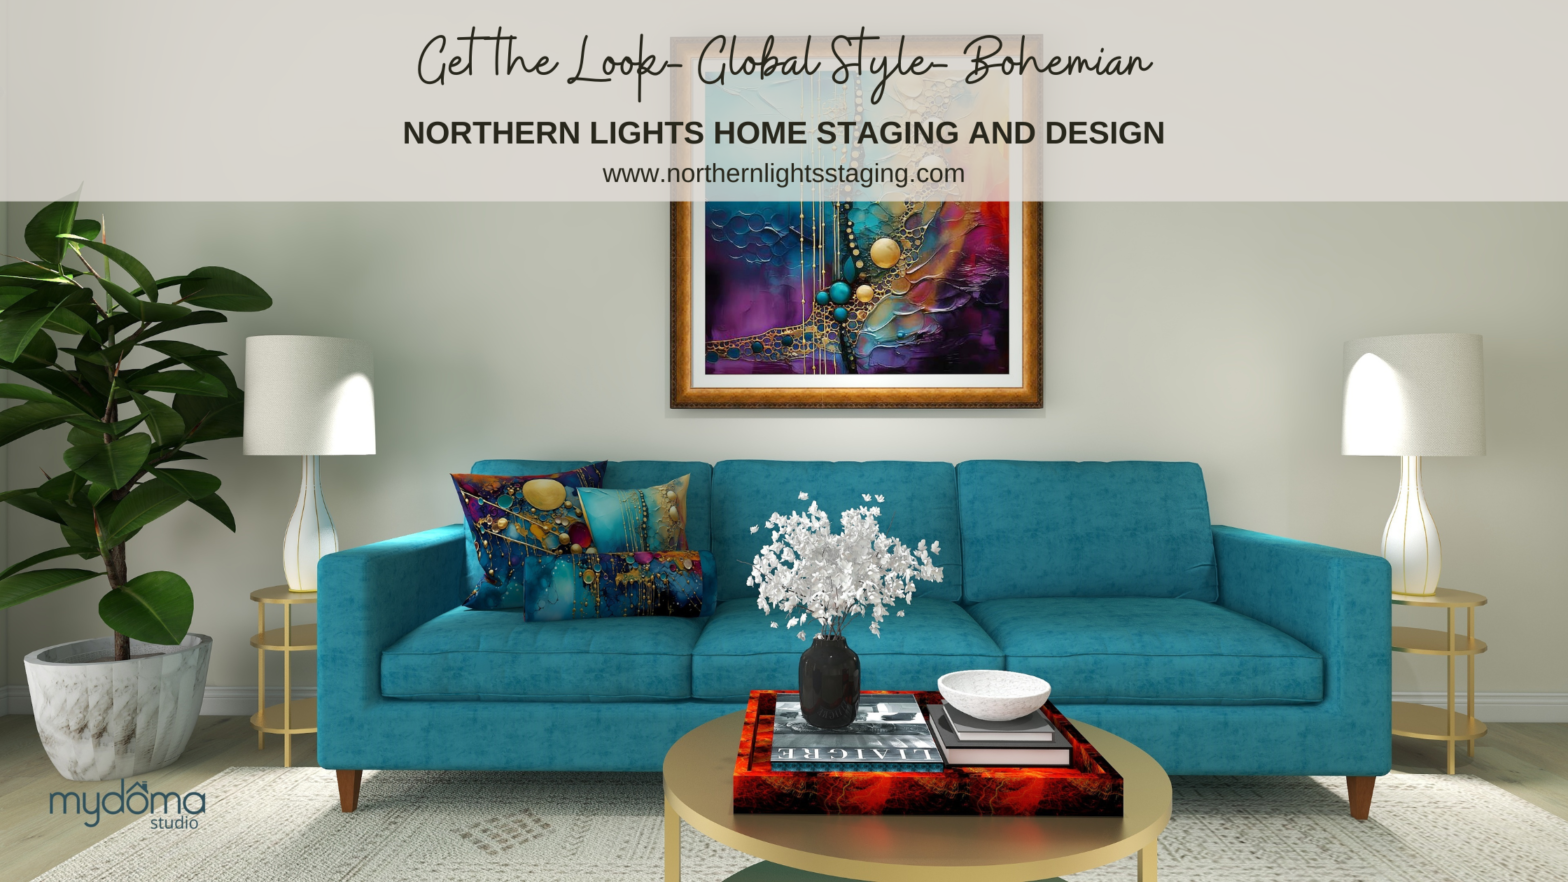 Get the Look- Global Style-Bohemian